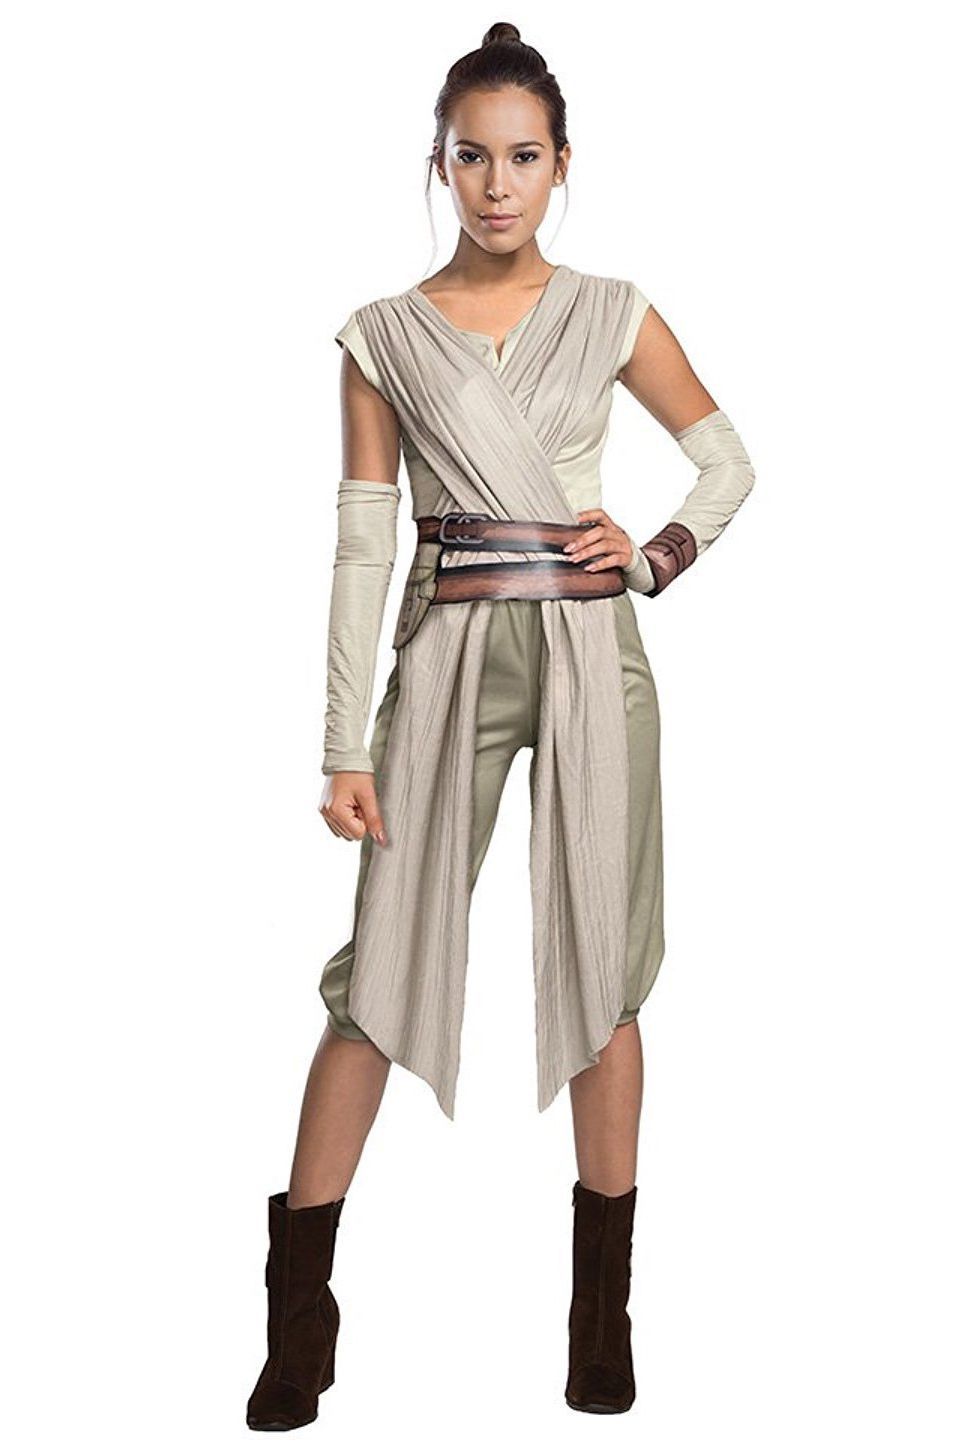 40 Best Star Wars Family Costumes for Kids and Adults in 2022